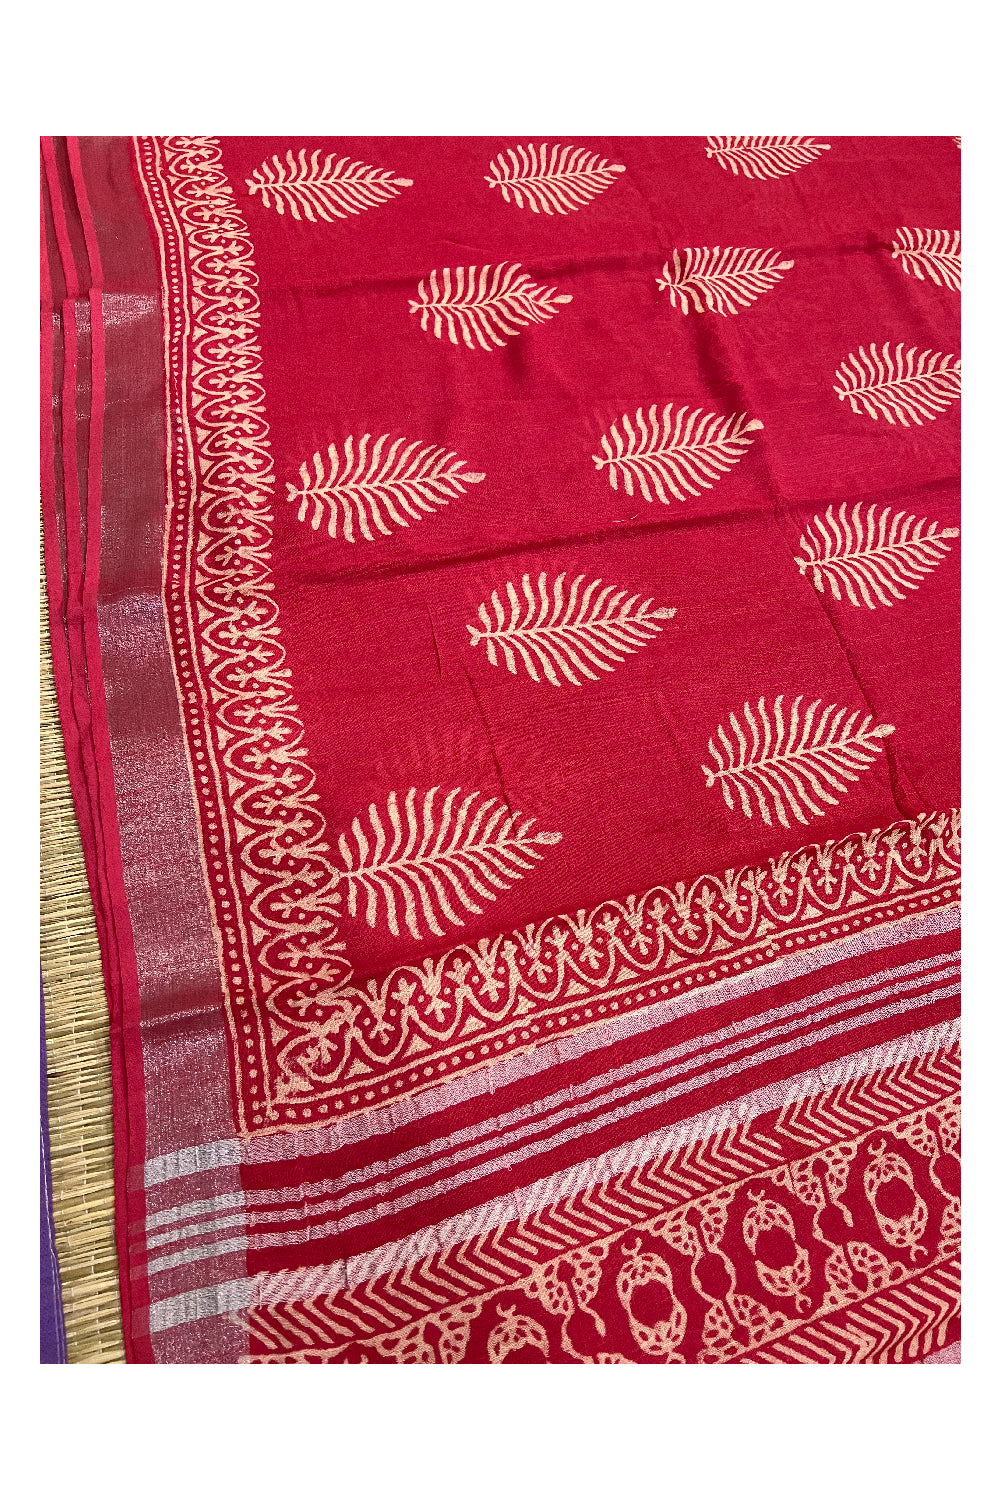 Southloom Linen Pinkish Red Designer Saree with White Prints and Tassels on Pallu